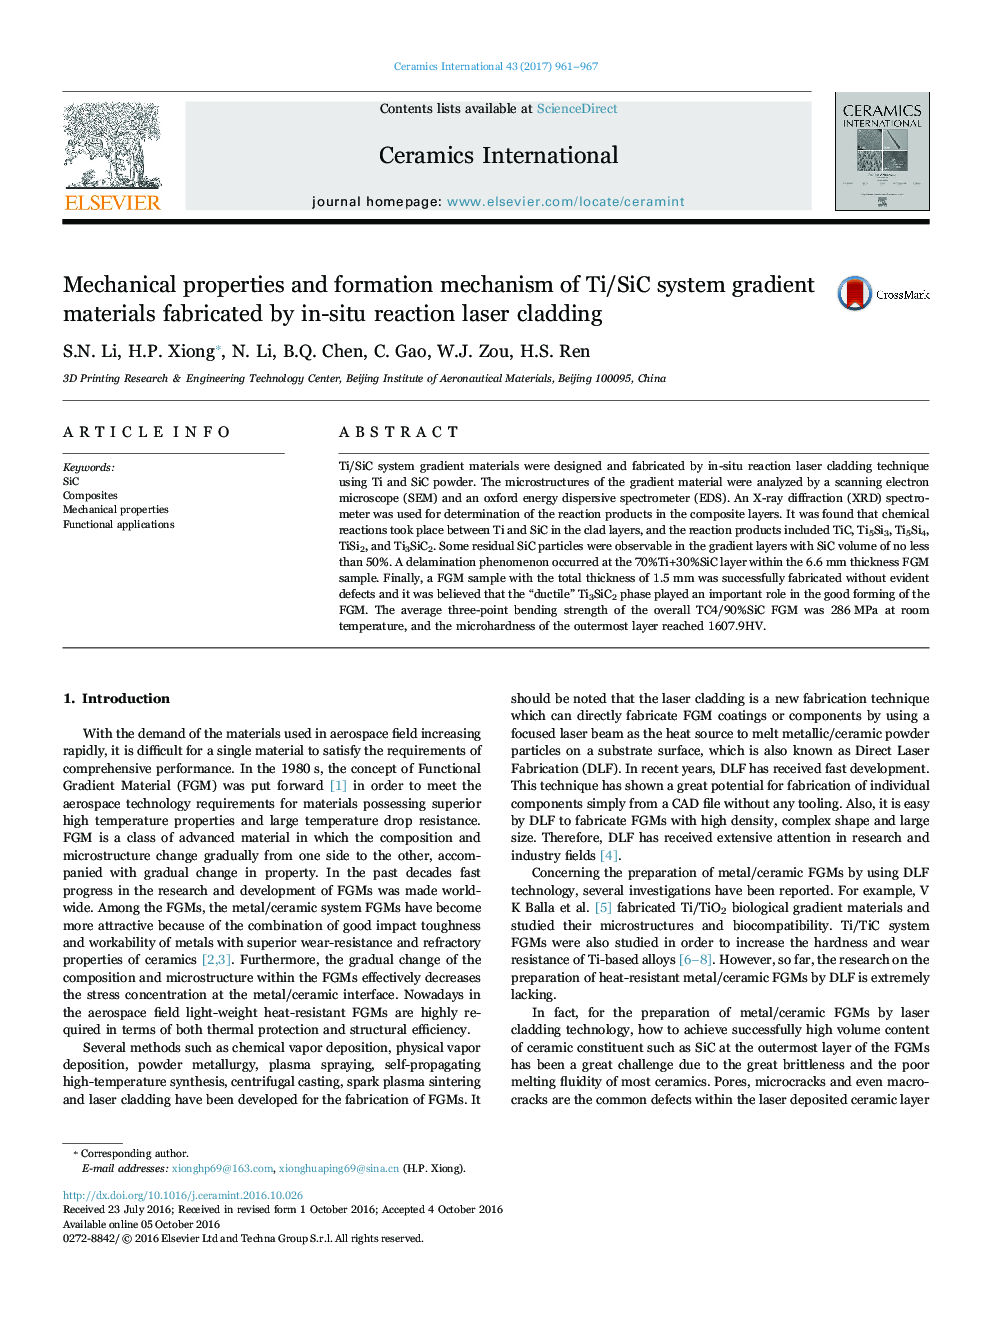 Mechanical properties and formation mechanism of Ti/SiC system gradient materials fabricated by in-situ reaction laser cladding